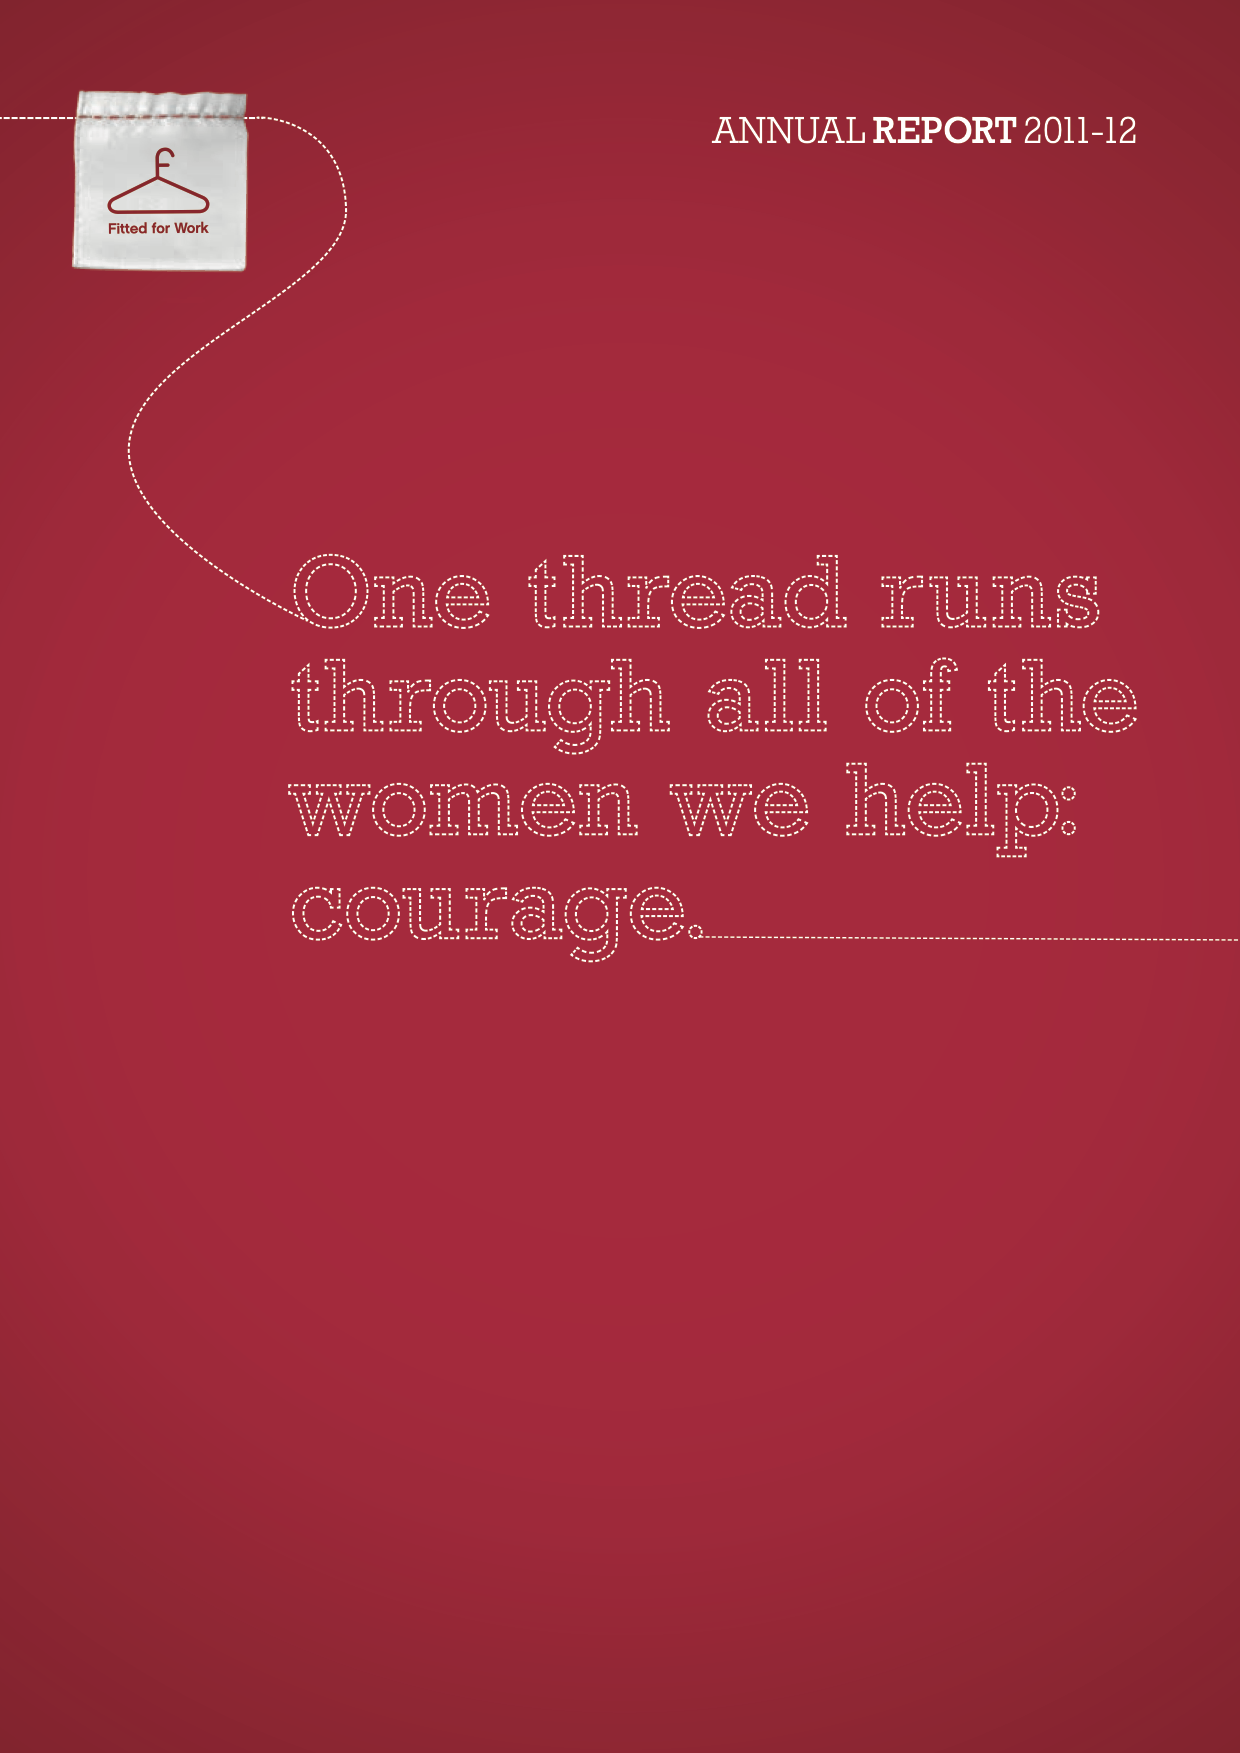 Red cover with the words "one thread runs through all of the women we help: courage"